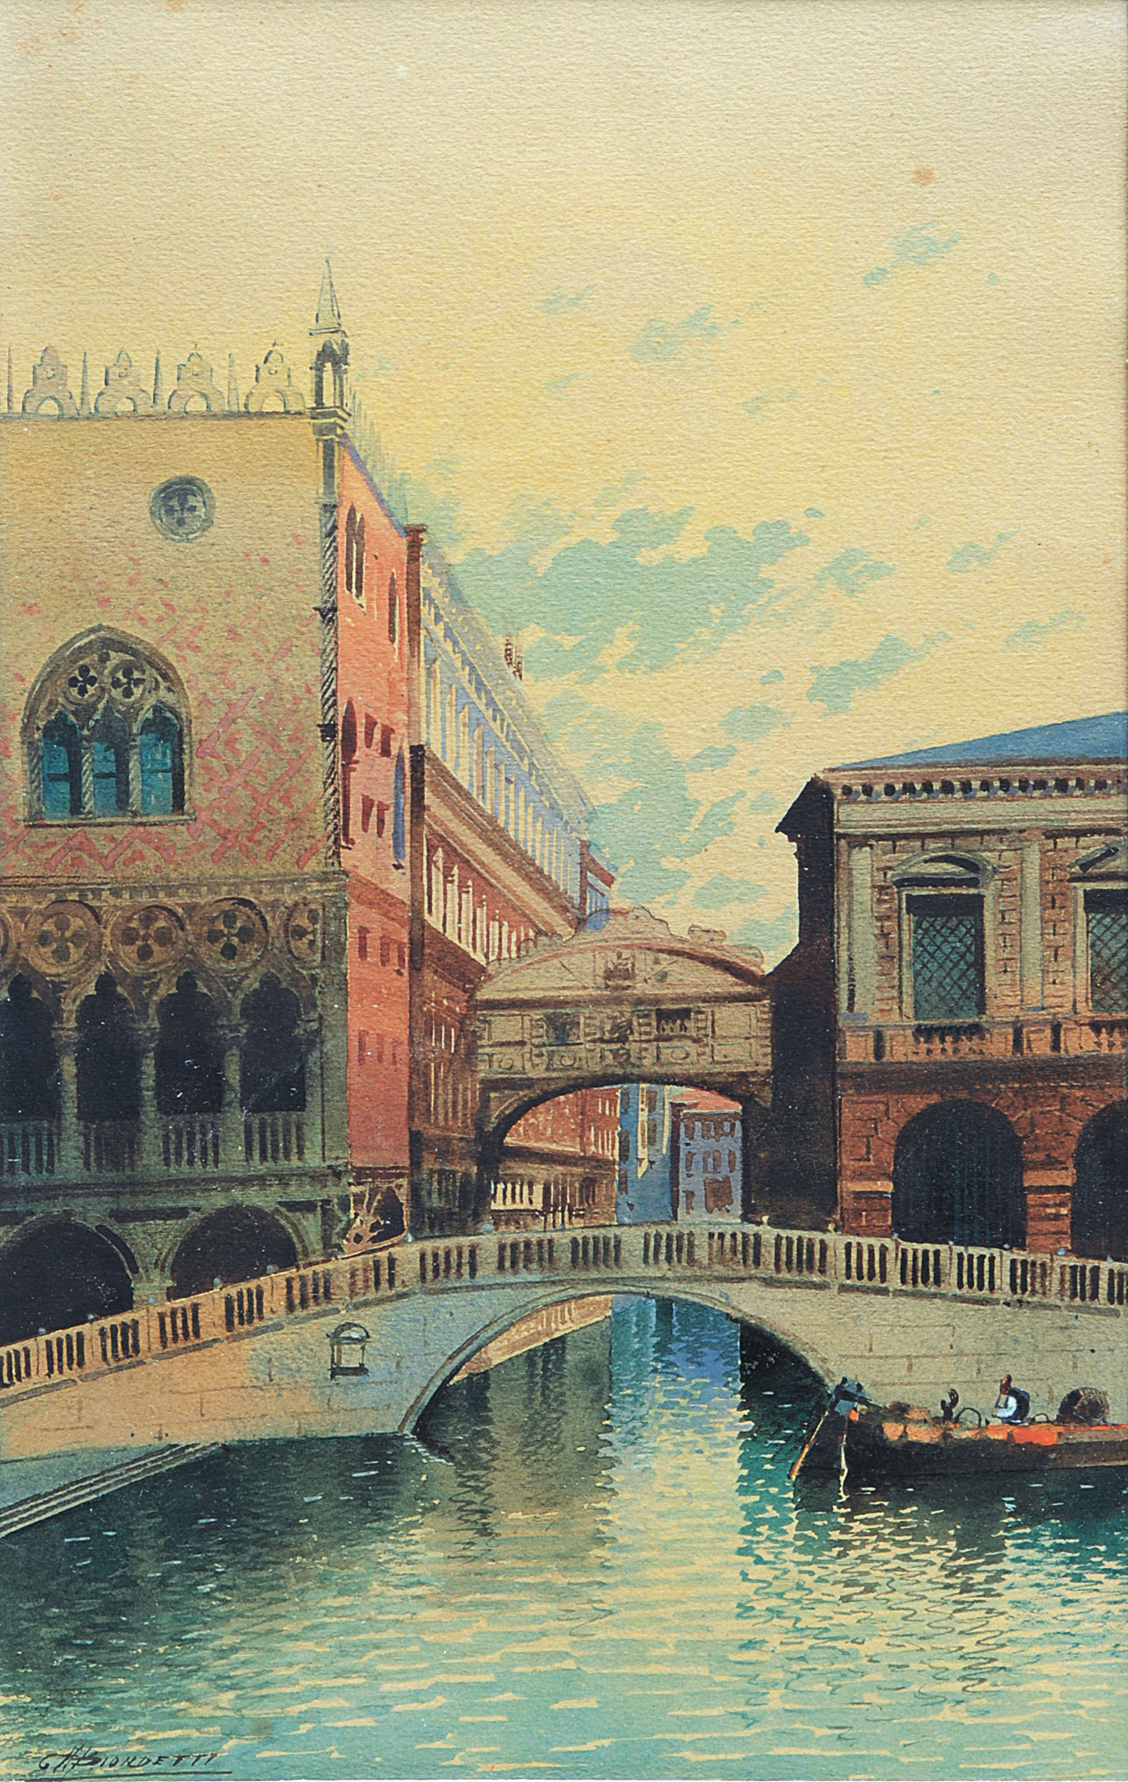 A view of the bridge of sighs and the Rio di Palazzo